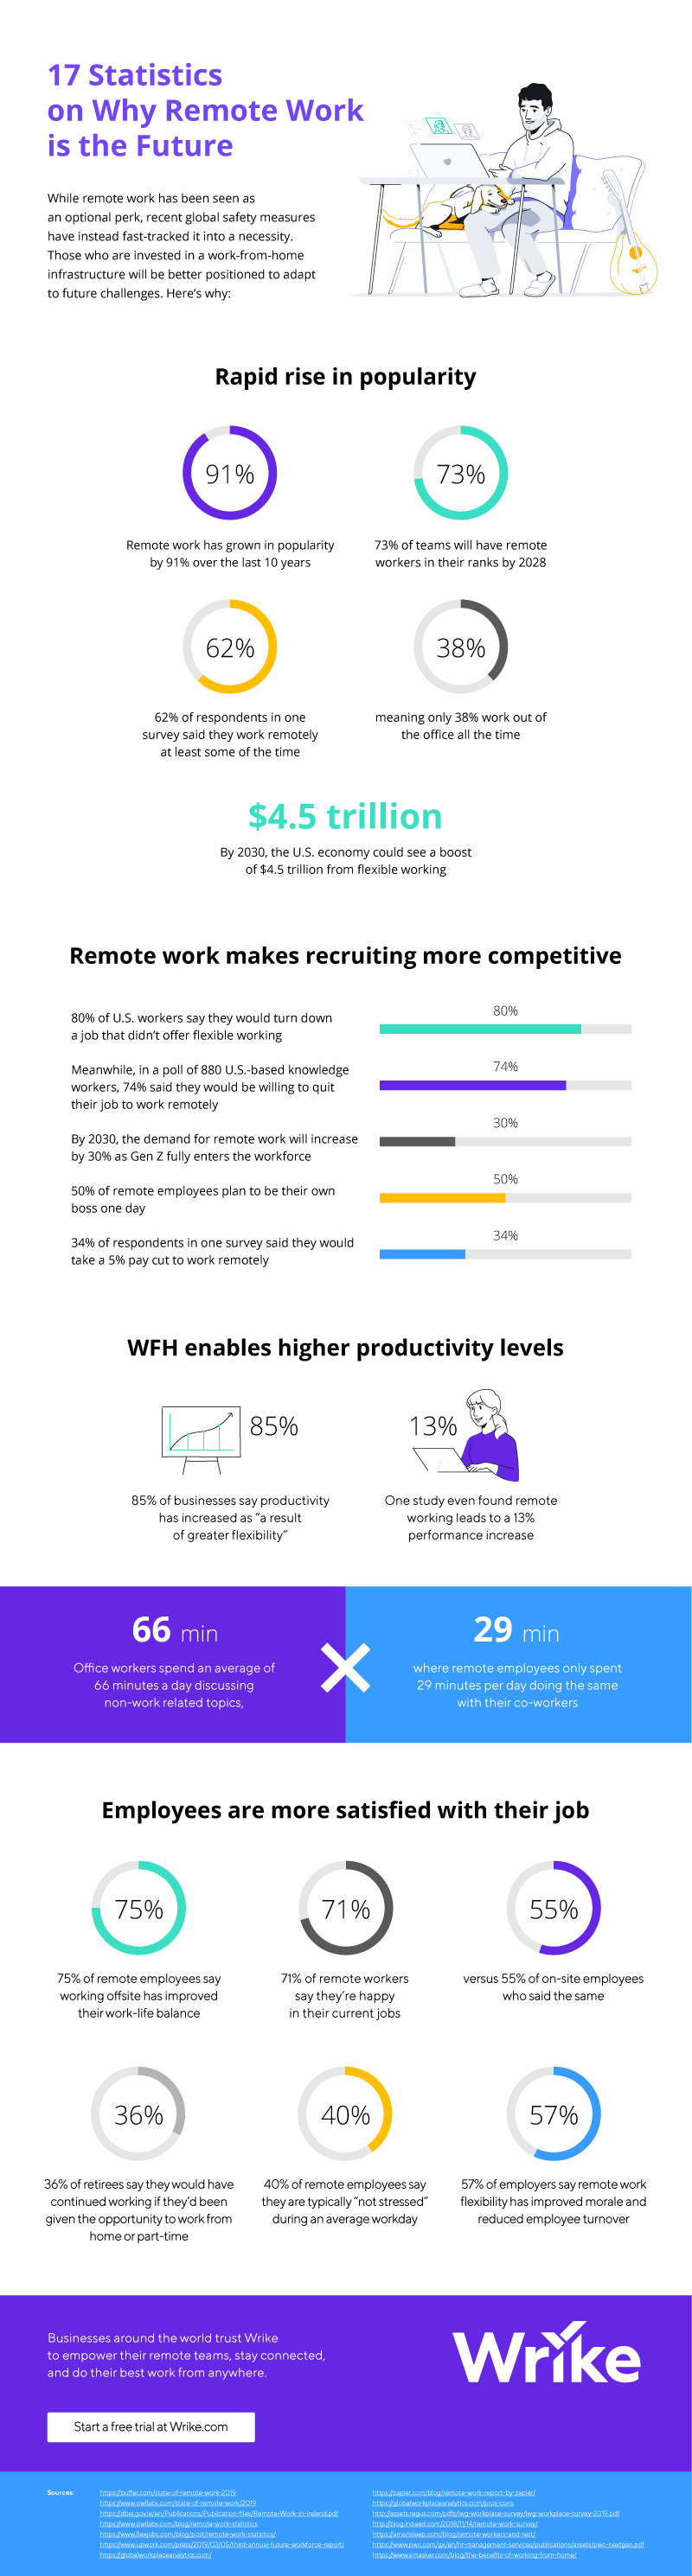 17 Reasons Why Remote Work is the Future (Infographic) 2